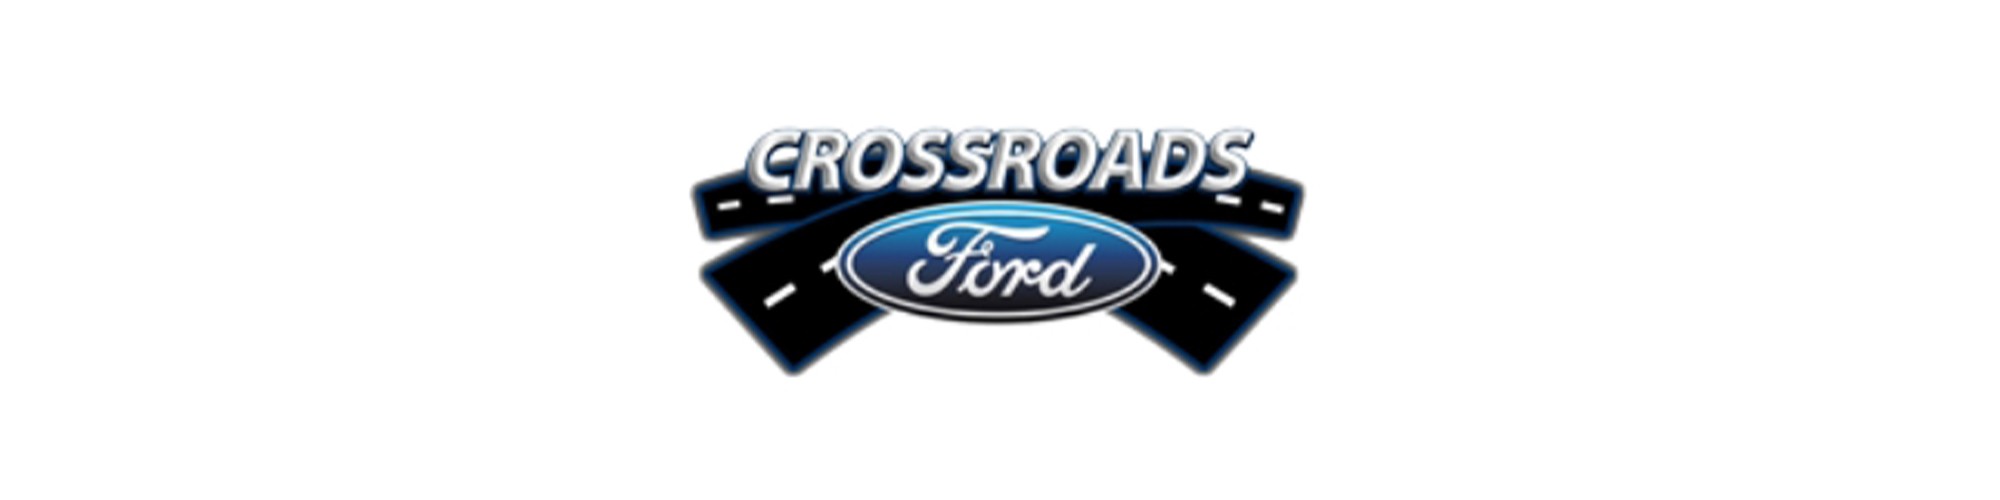 Crossroads Ford Sanford cover image